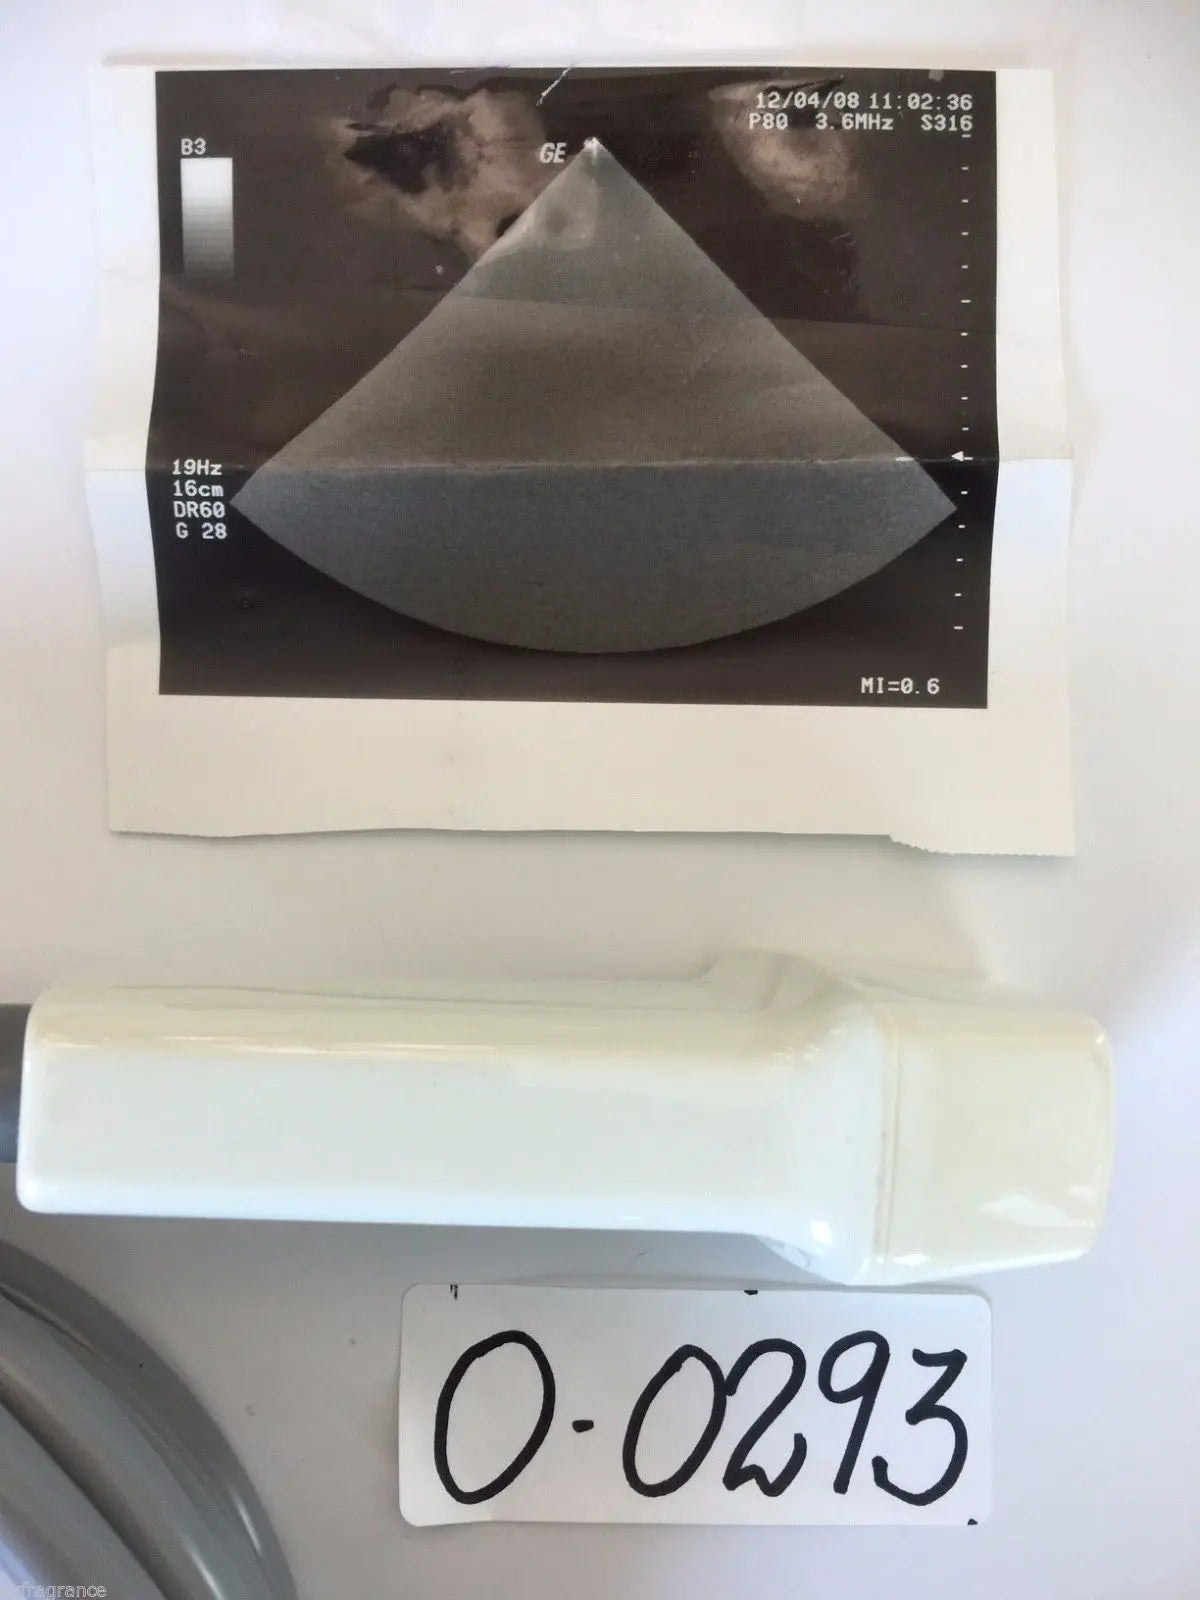 GE S316 Cardiac Sector Ultrasound Transducer Probe (5.0MHz) USED DIAGNOSTIC ULTRASOUND MACHINES FOR SALE